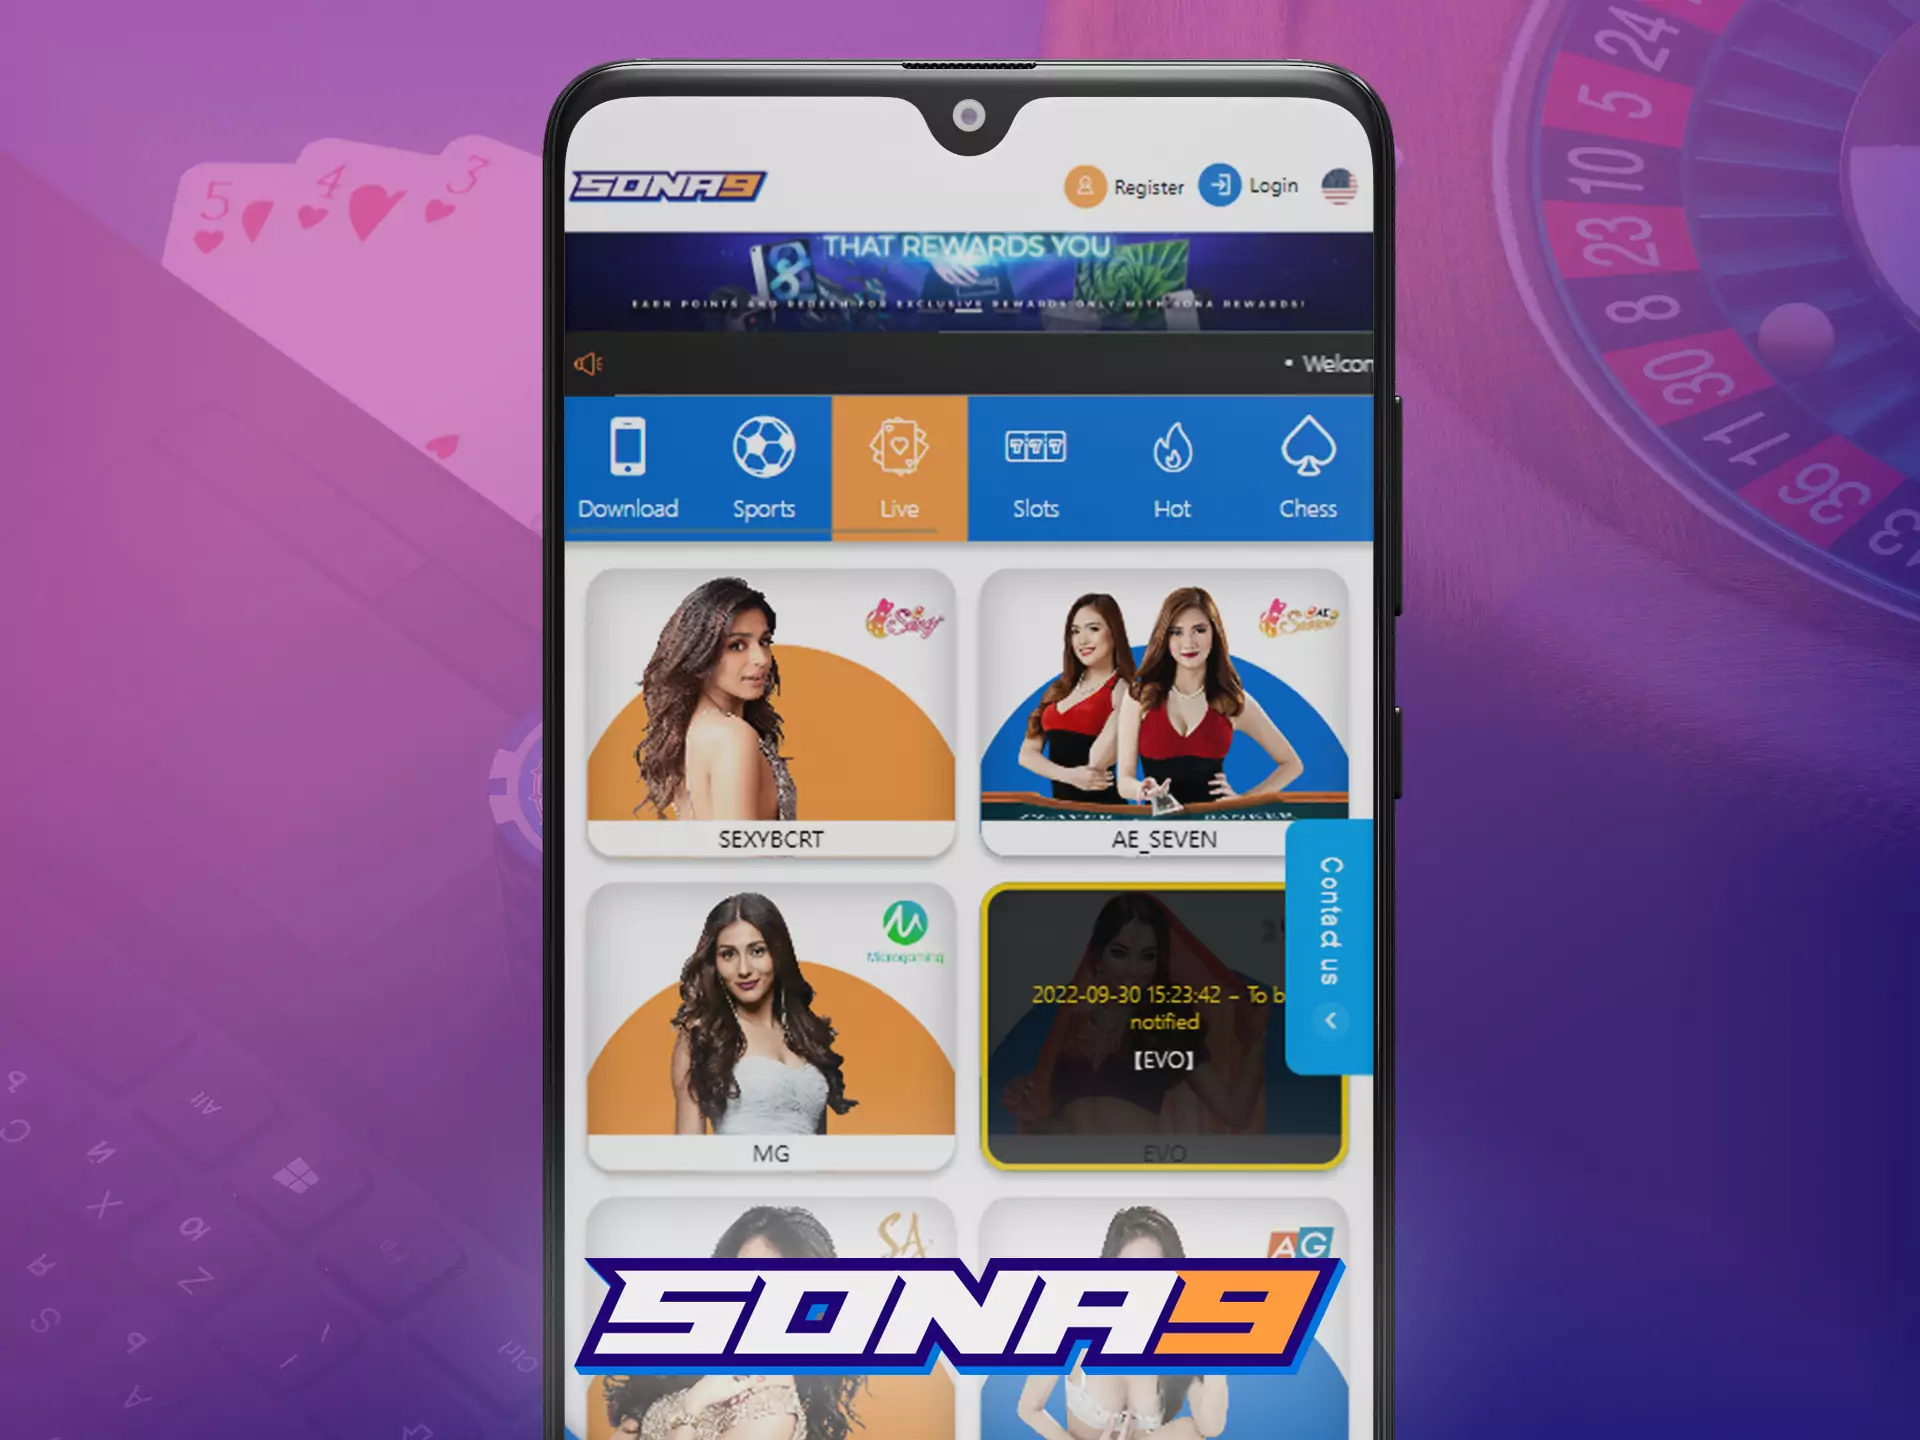 In the Sona9 app, there is a casino section with slots and table games.